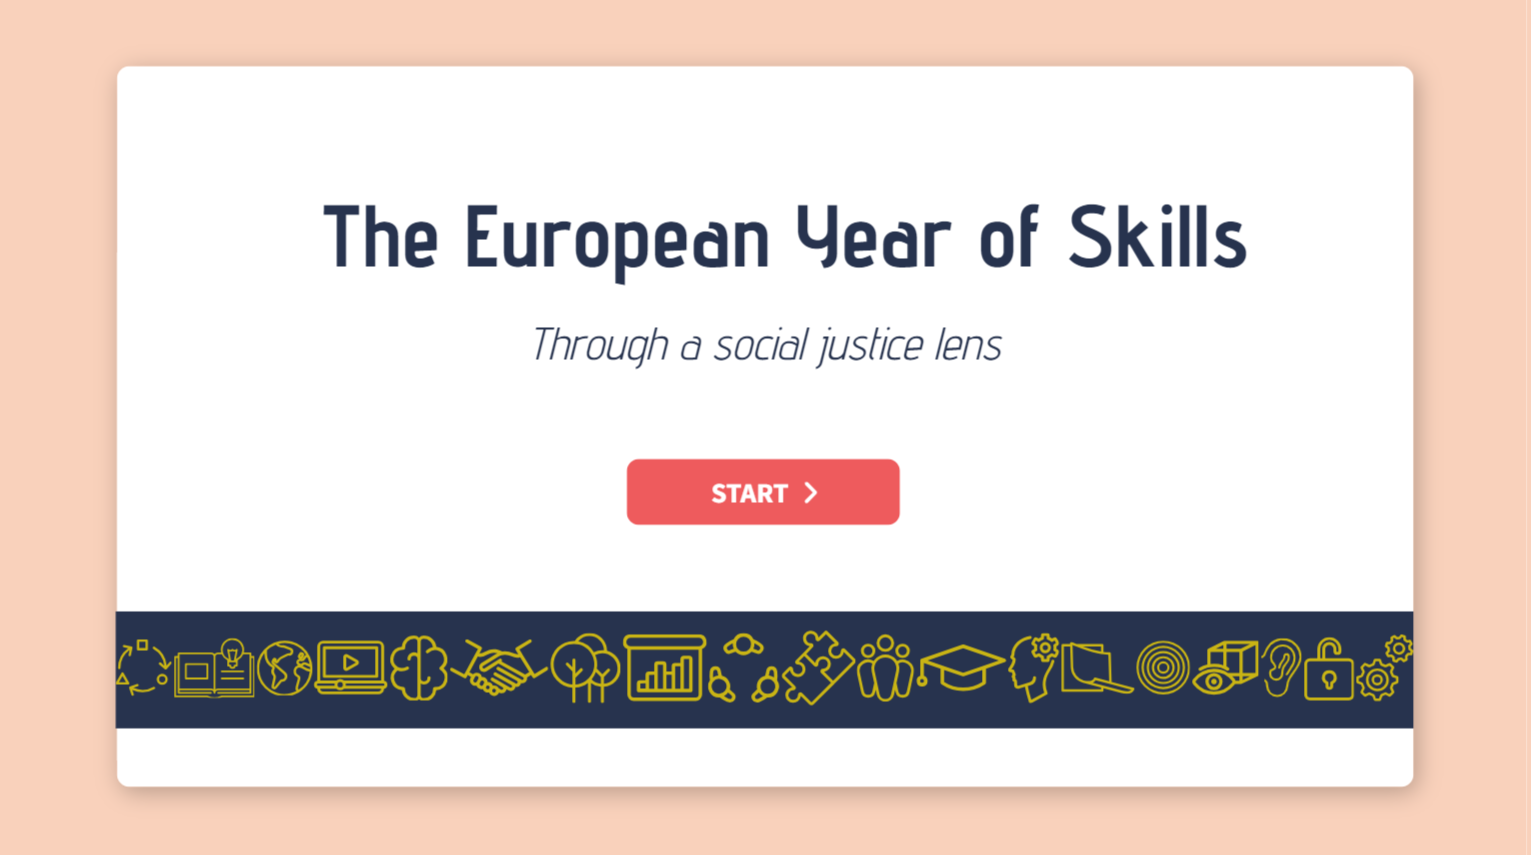 Education Policy Pill: European Year of Skills through a social justice lens